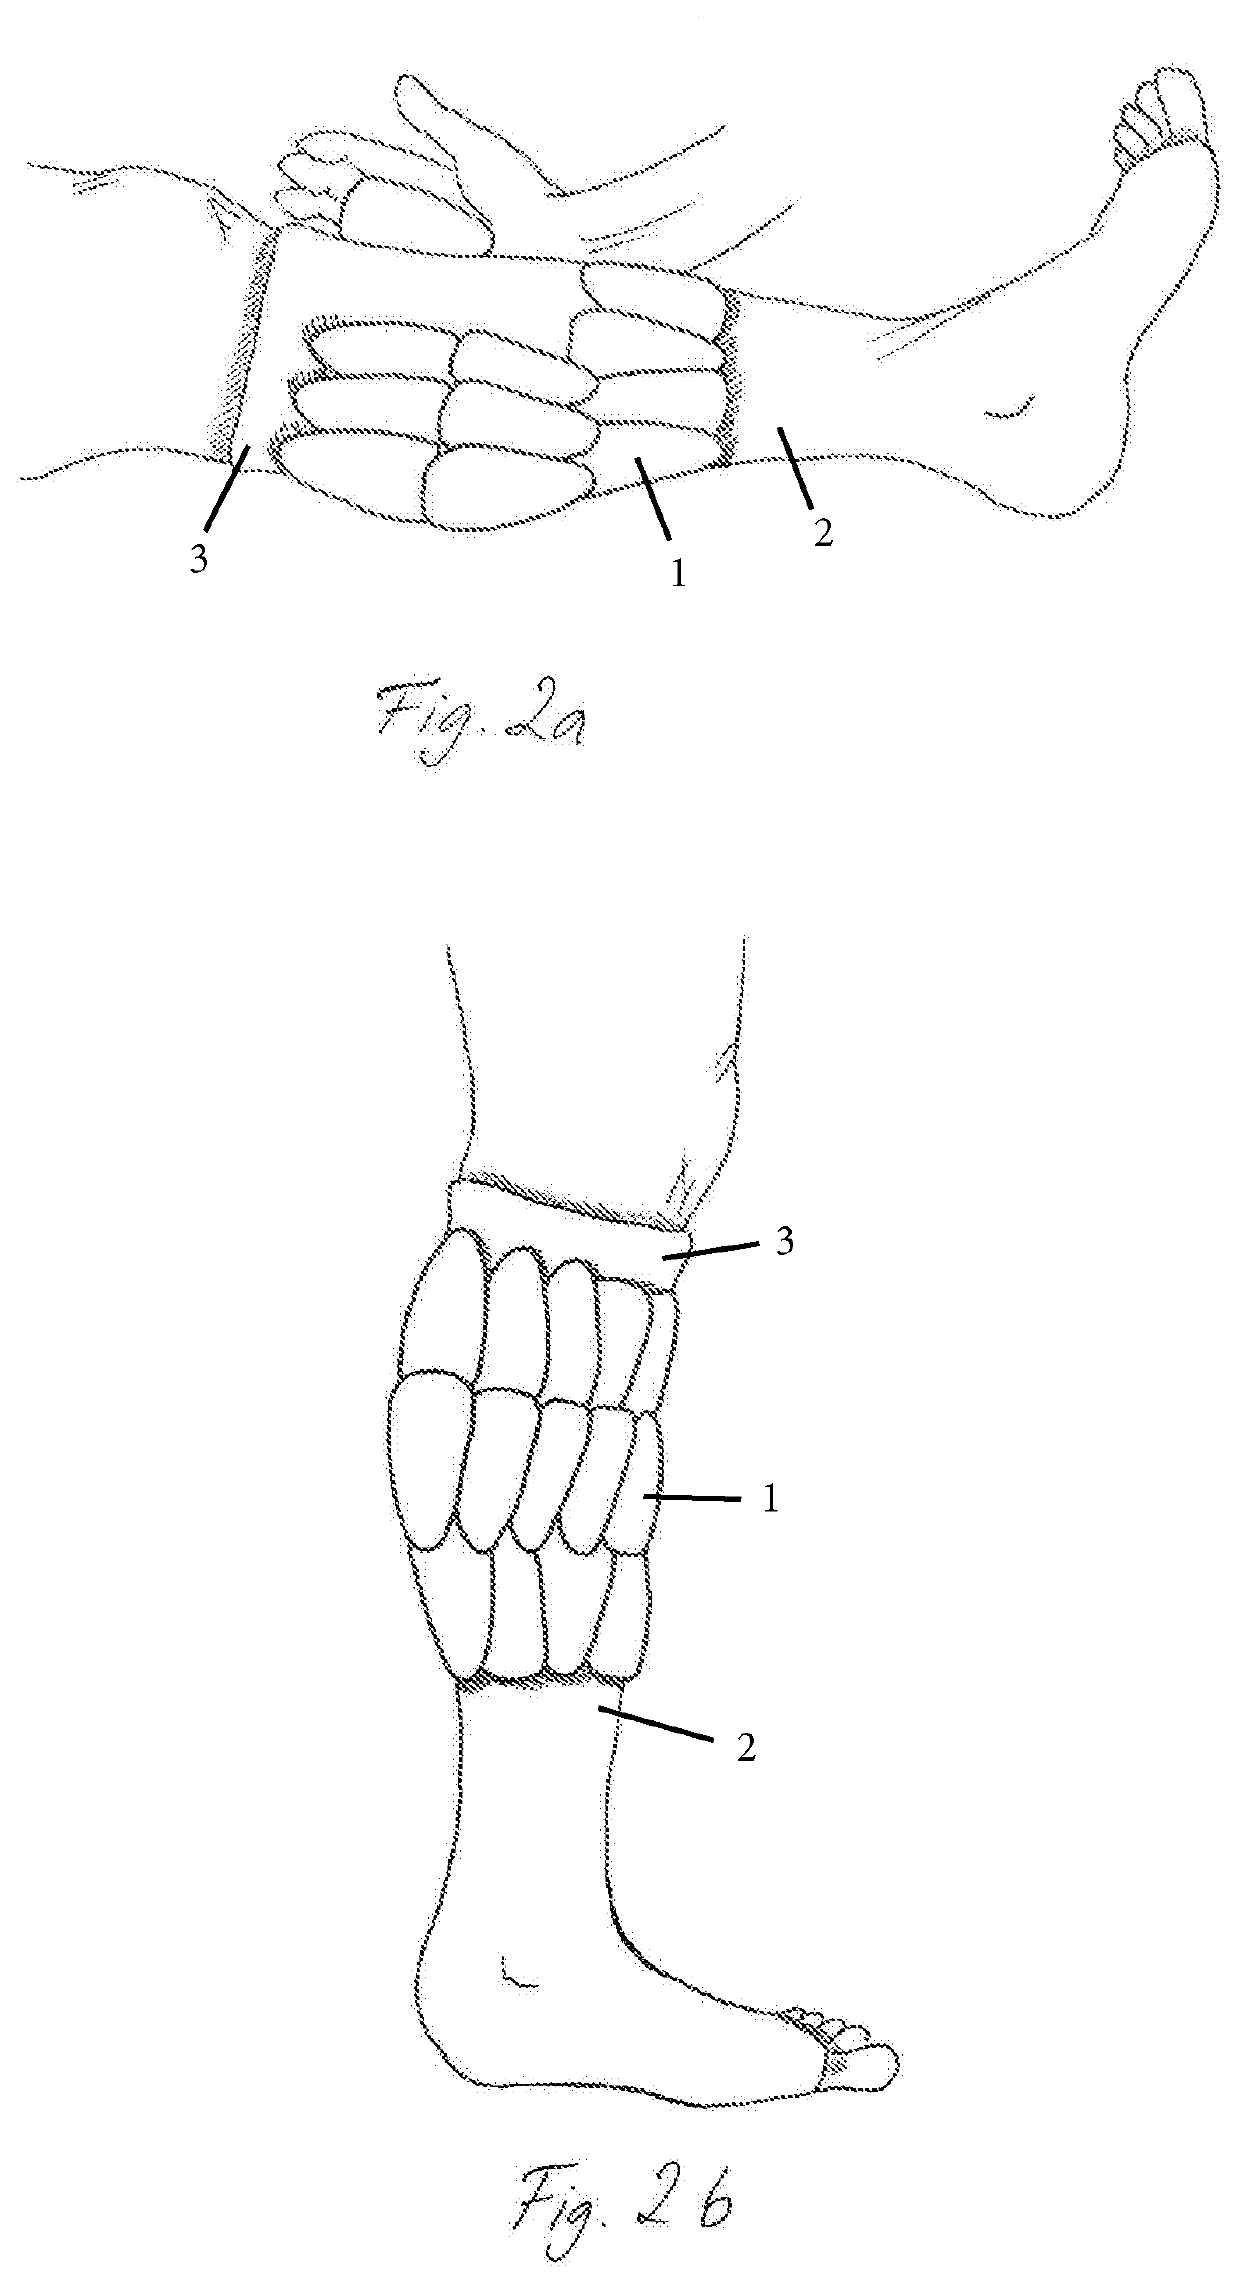 A Kit And Therapeutic Pressure Assembly With Patches For Applying Pressure To A Limb Or Other Body Part